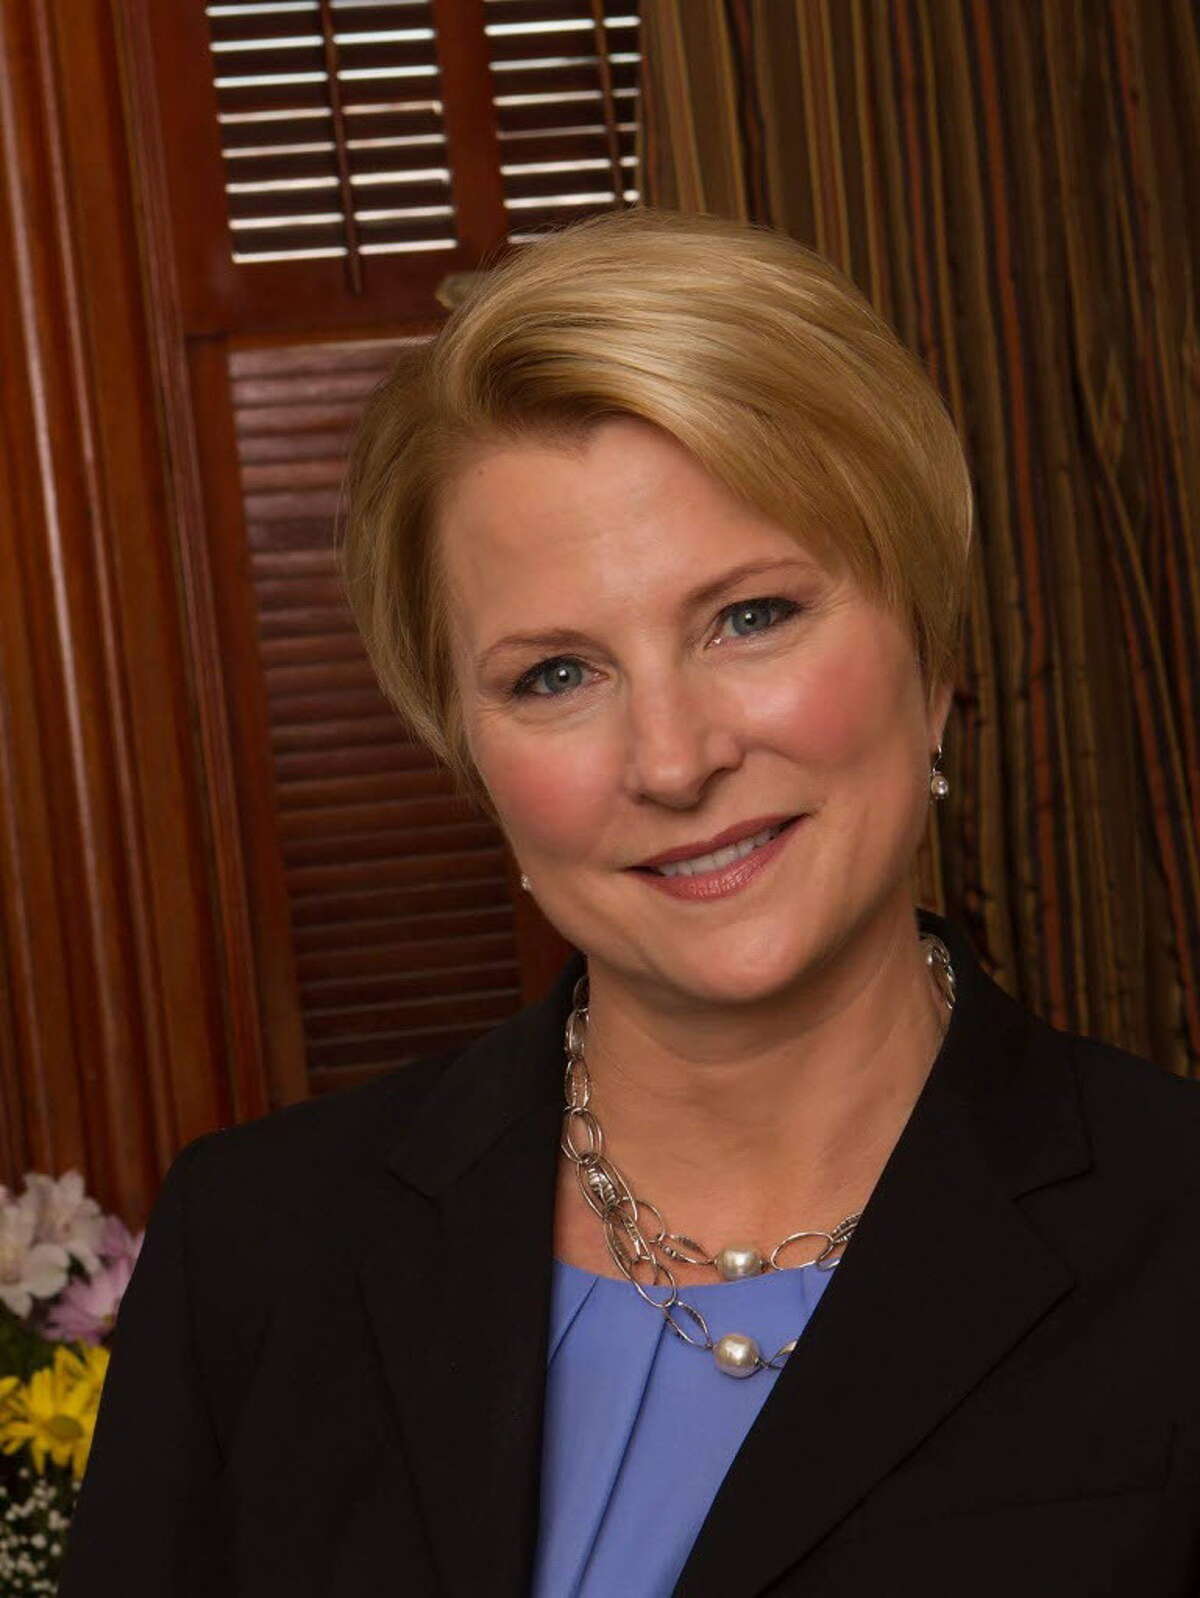 Mary Beth Walsh is a Republican candidate for the 112th Assembly seat. (Photo provided)